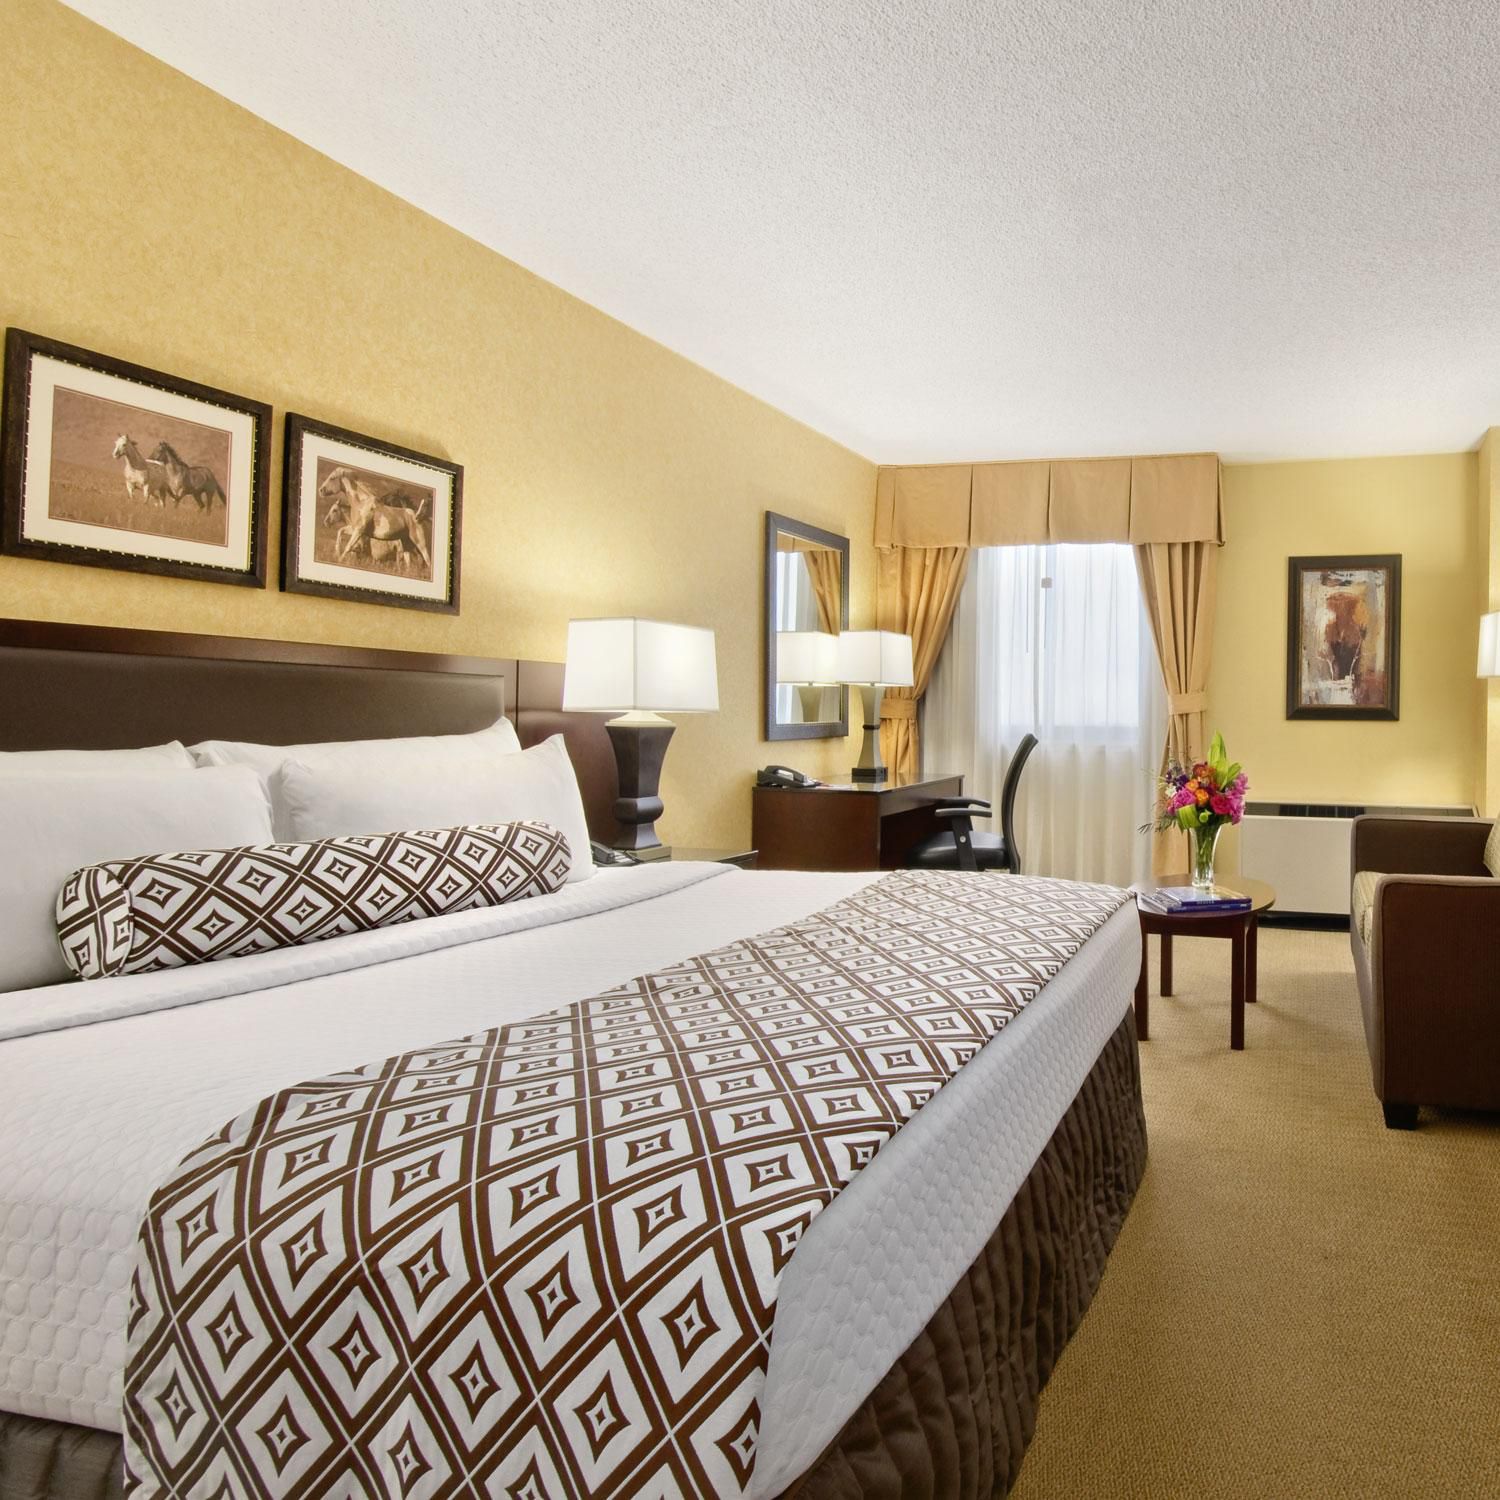 Make yourself at home in our King Bed Guest Rooms